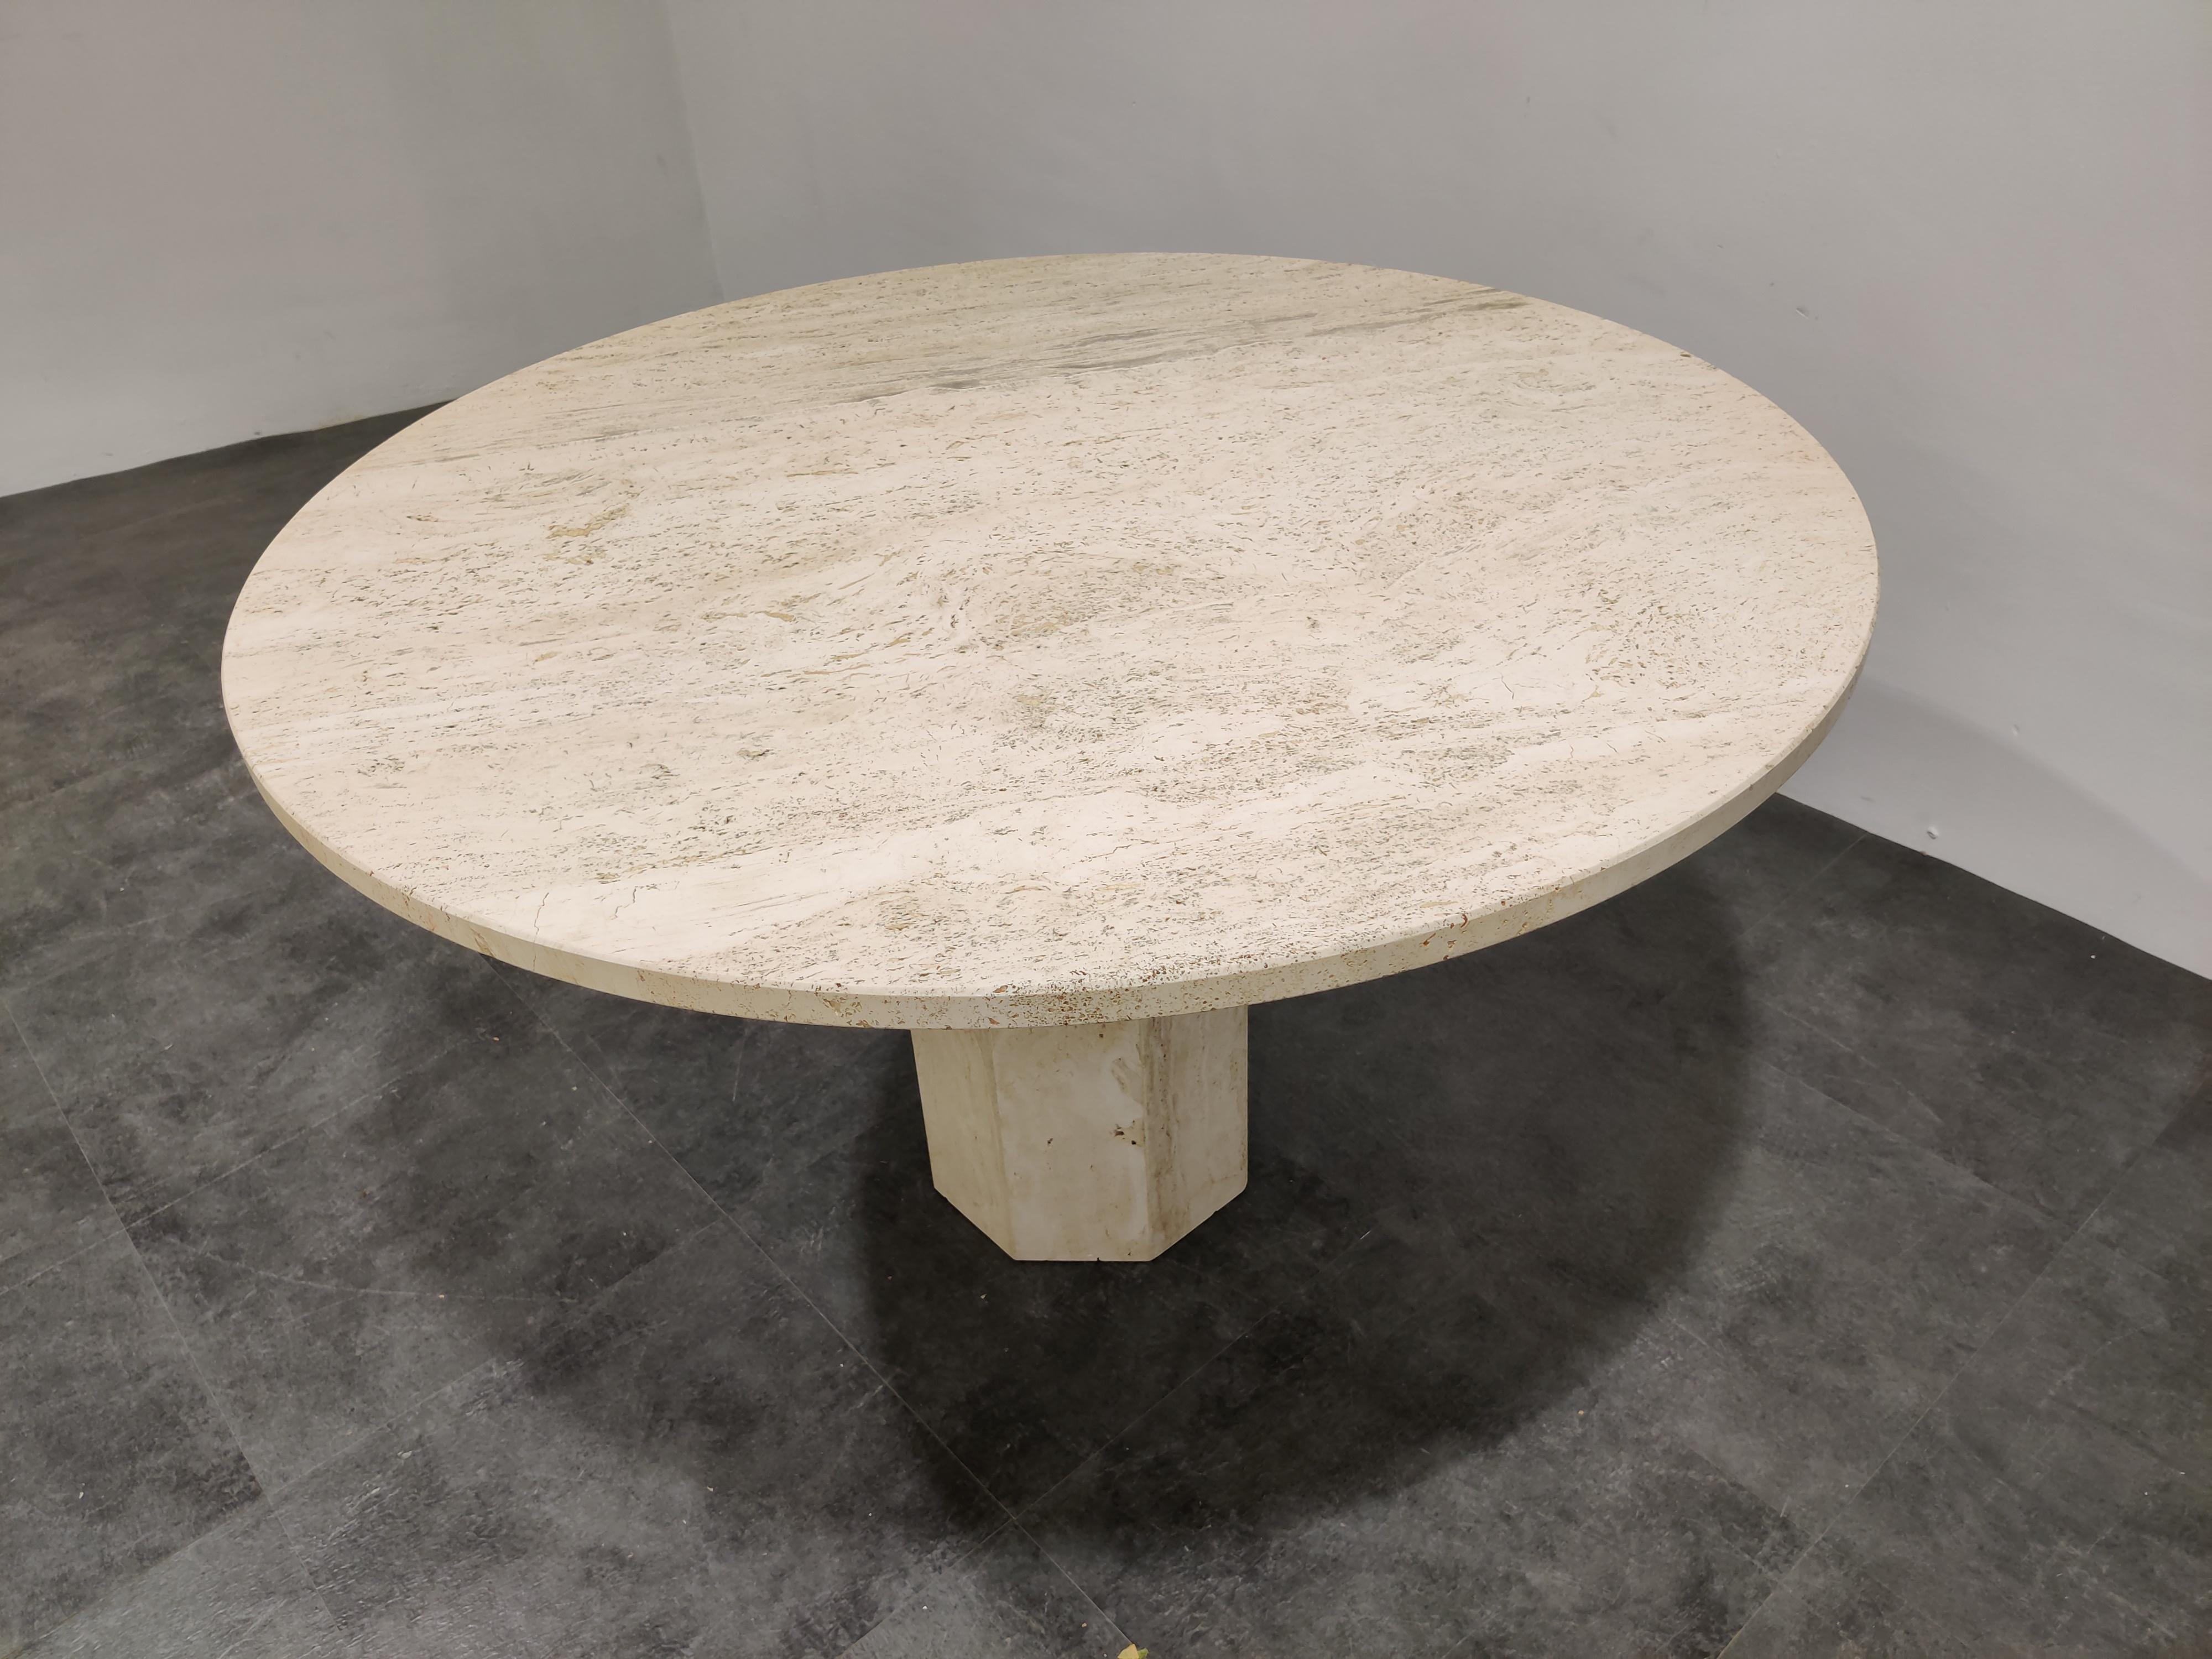 Beautiful dining table made from travertine stone.

Gorgeous travertine stone color.

Lovely round top resting on a octogonal pedestal base.

Good condition

1970s - Italy

Measures: Height 74cm/29.13